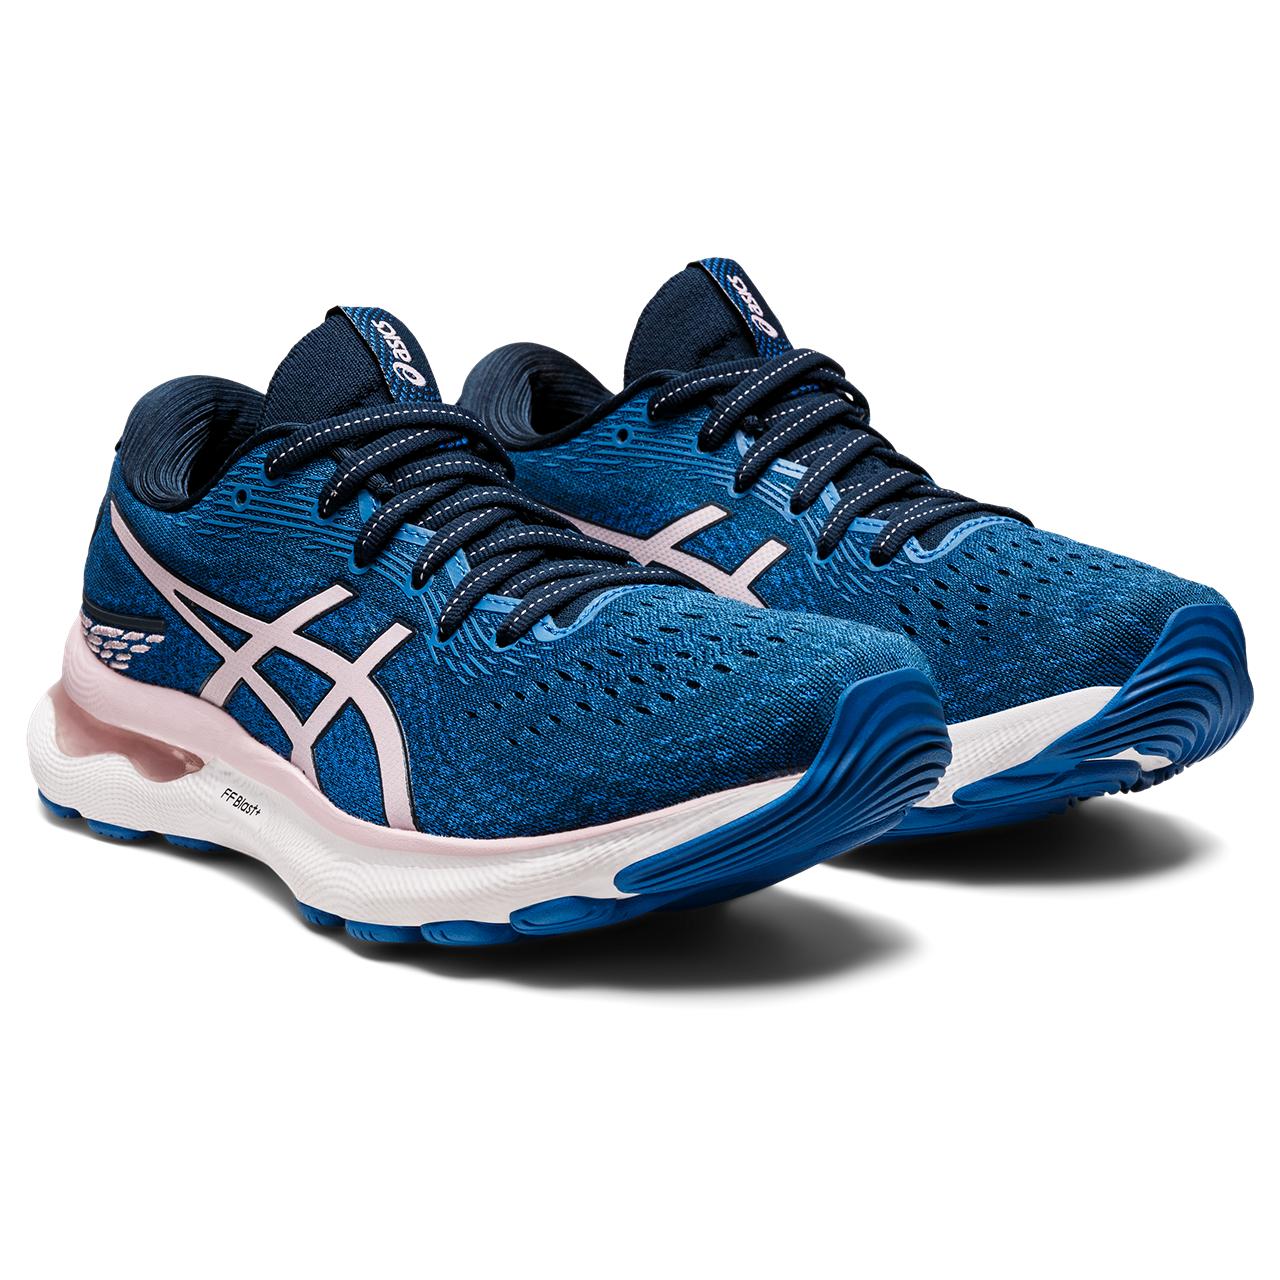 The Women's Nimbus 24 is one of the classics from ASICS.  It's been one of the best-selling cushioned neutral shoes for many years and will no doubt continue that trend with version 24. This version comes in the Wide Fit.  "D"